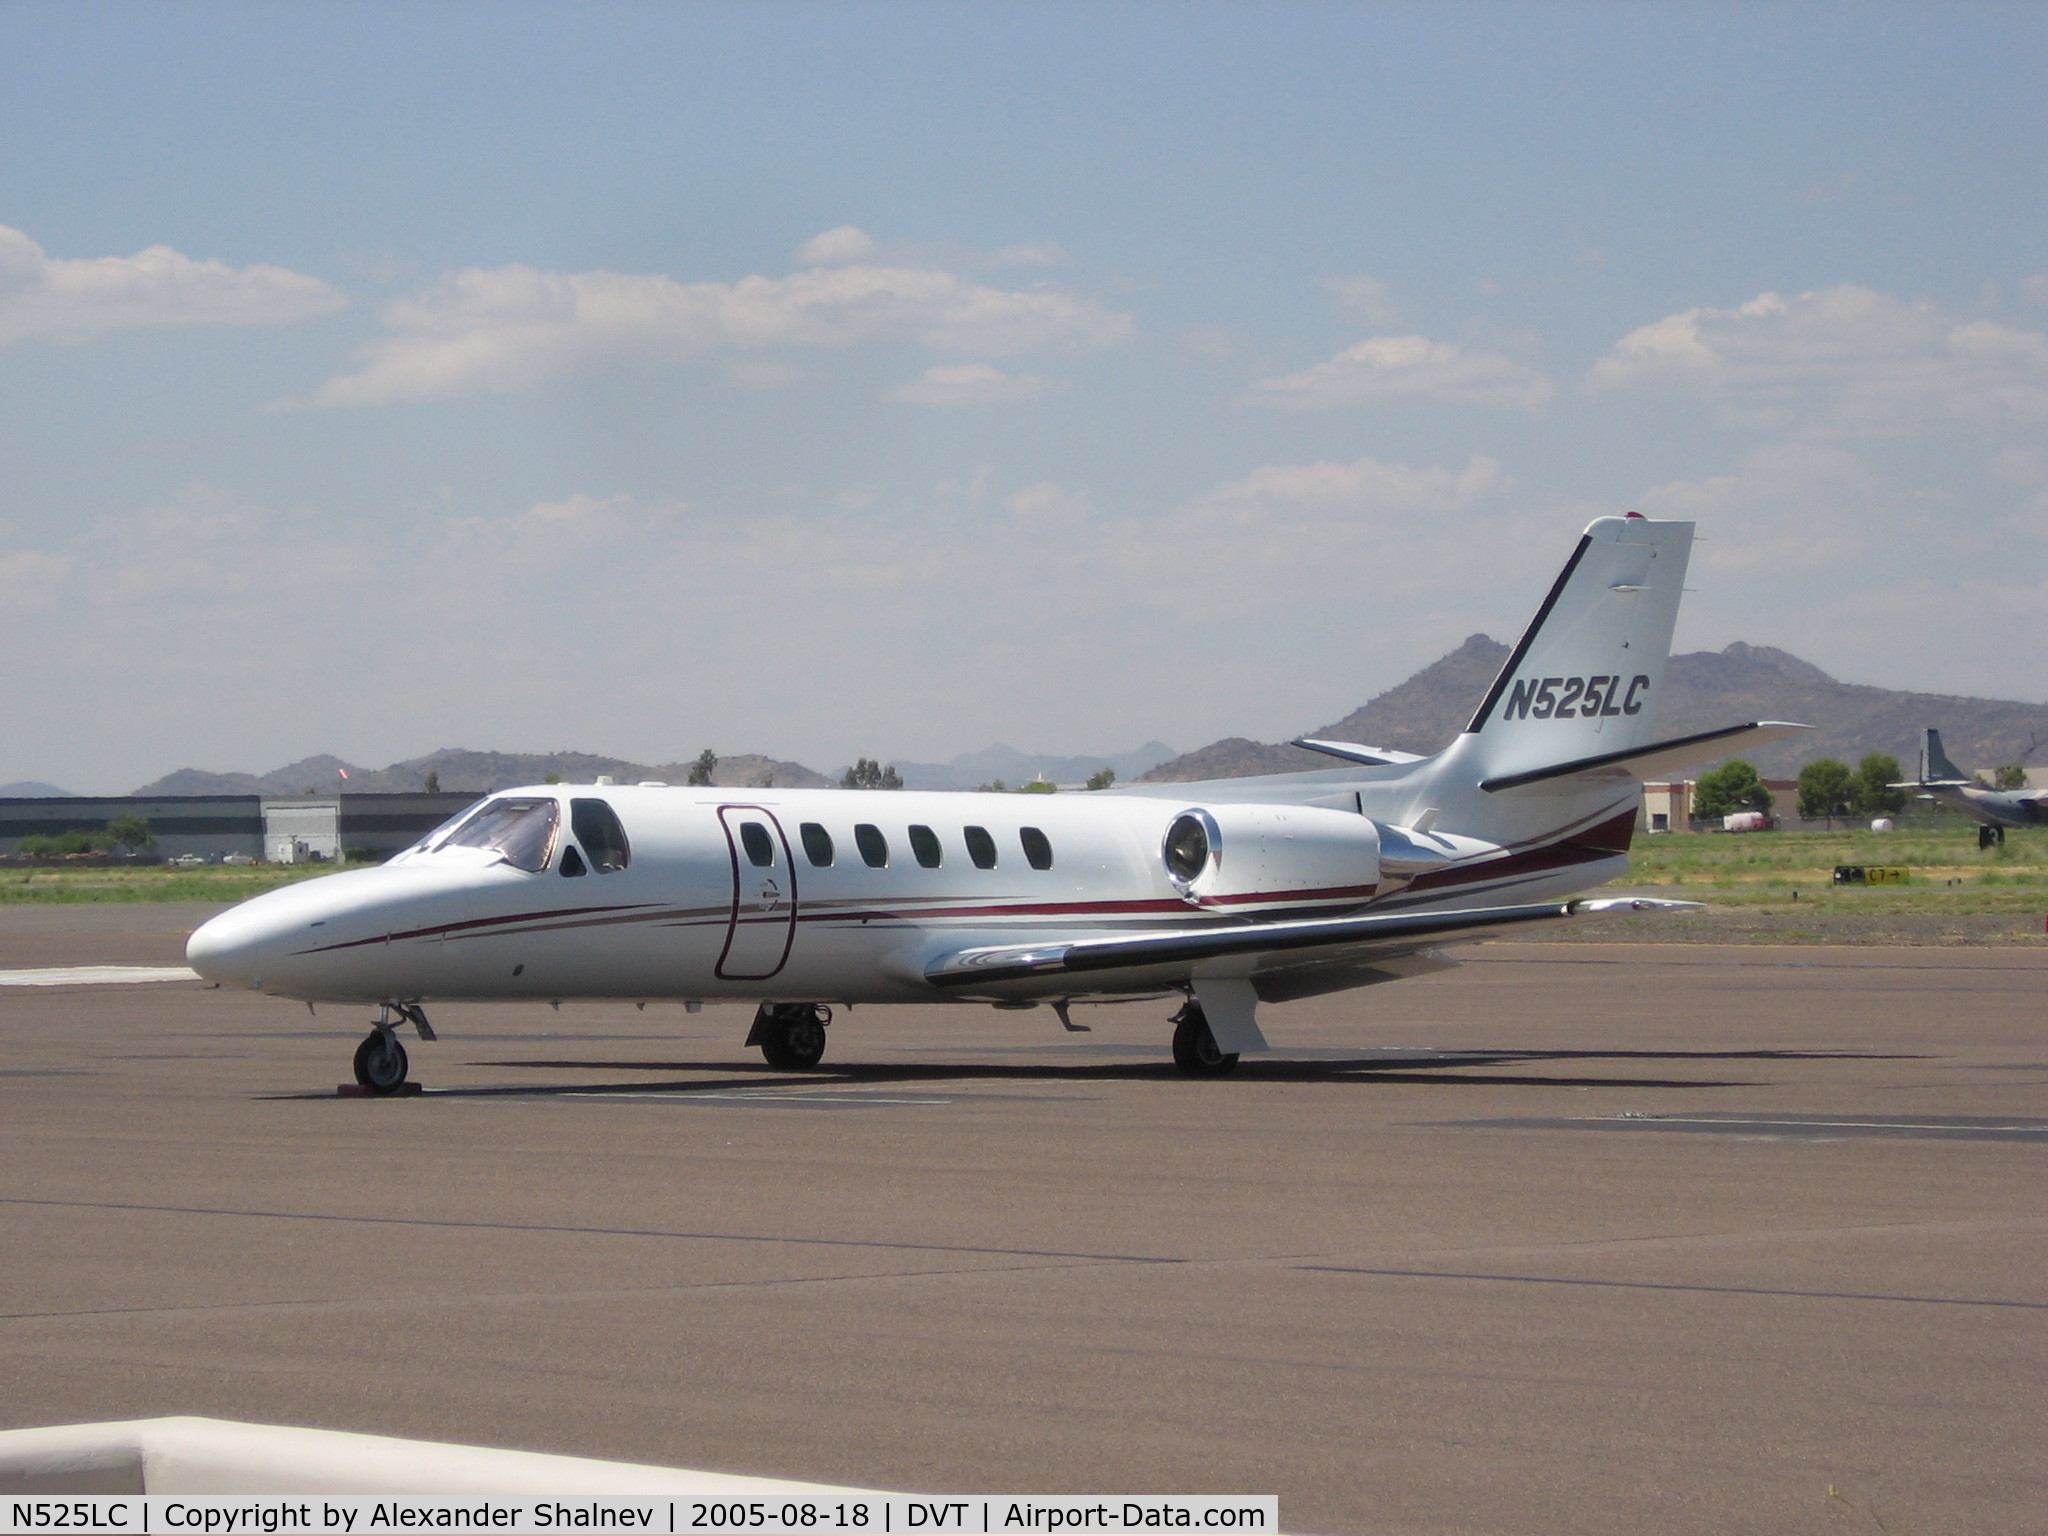 N525LC, 1981 Cessna 550 C/N 550-0349, parked on airfield